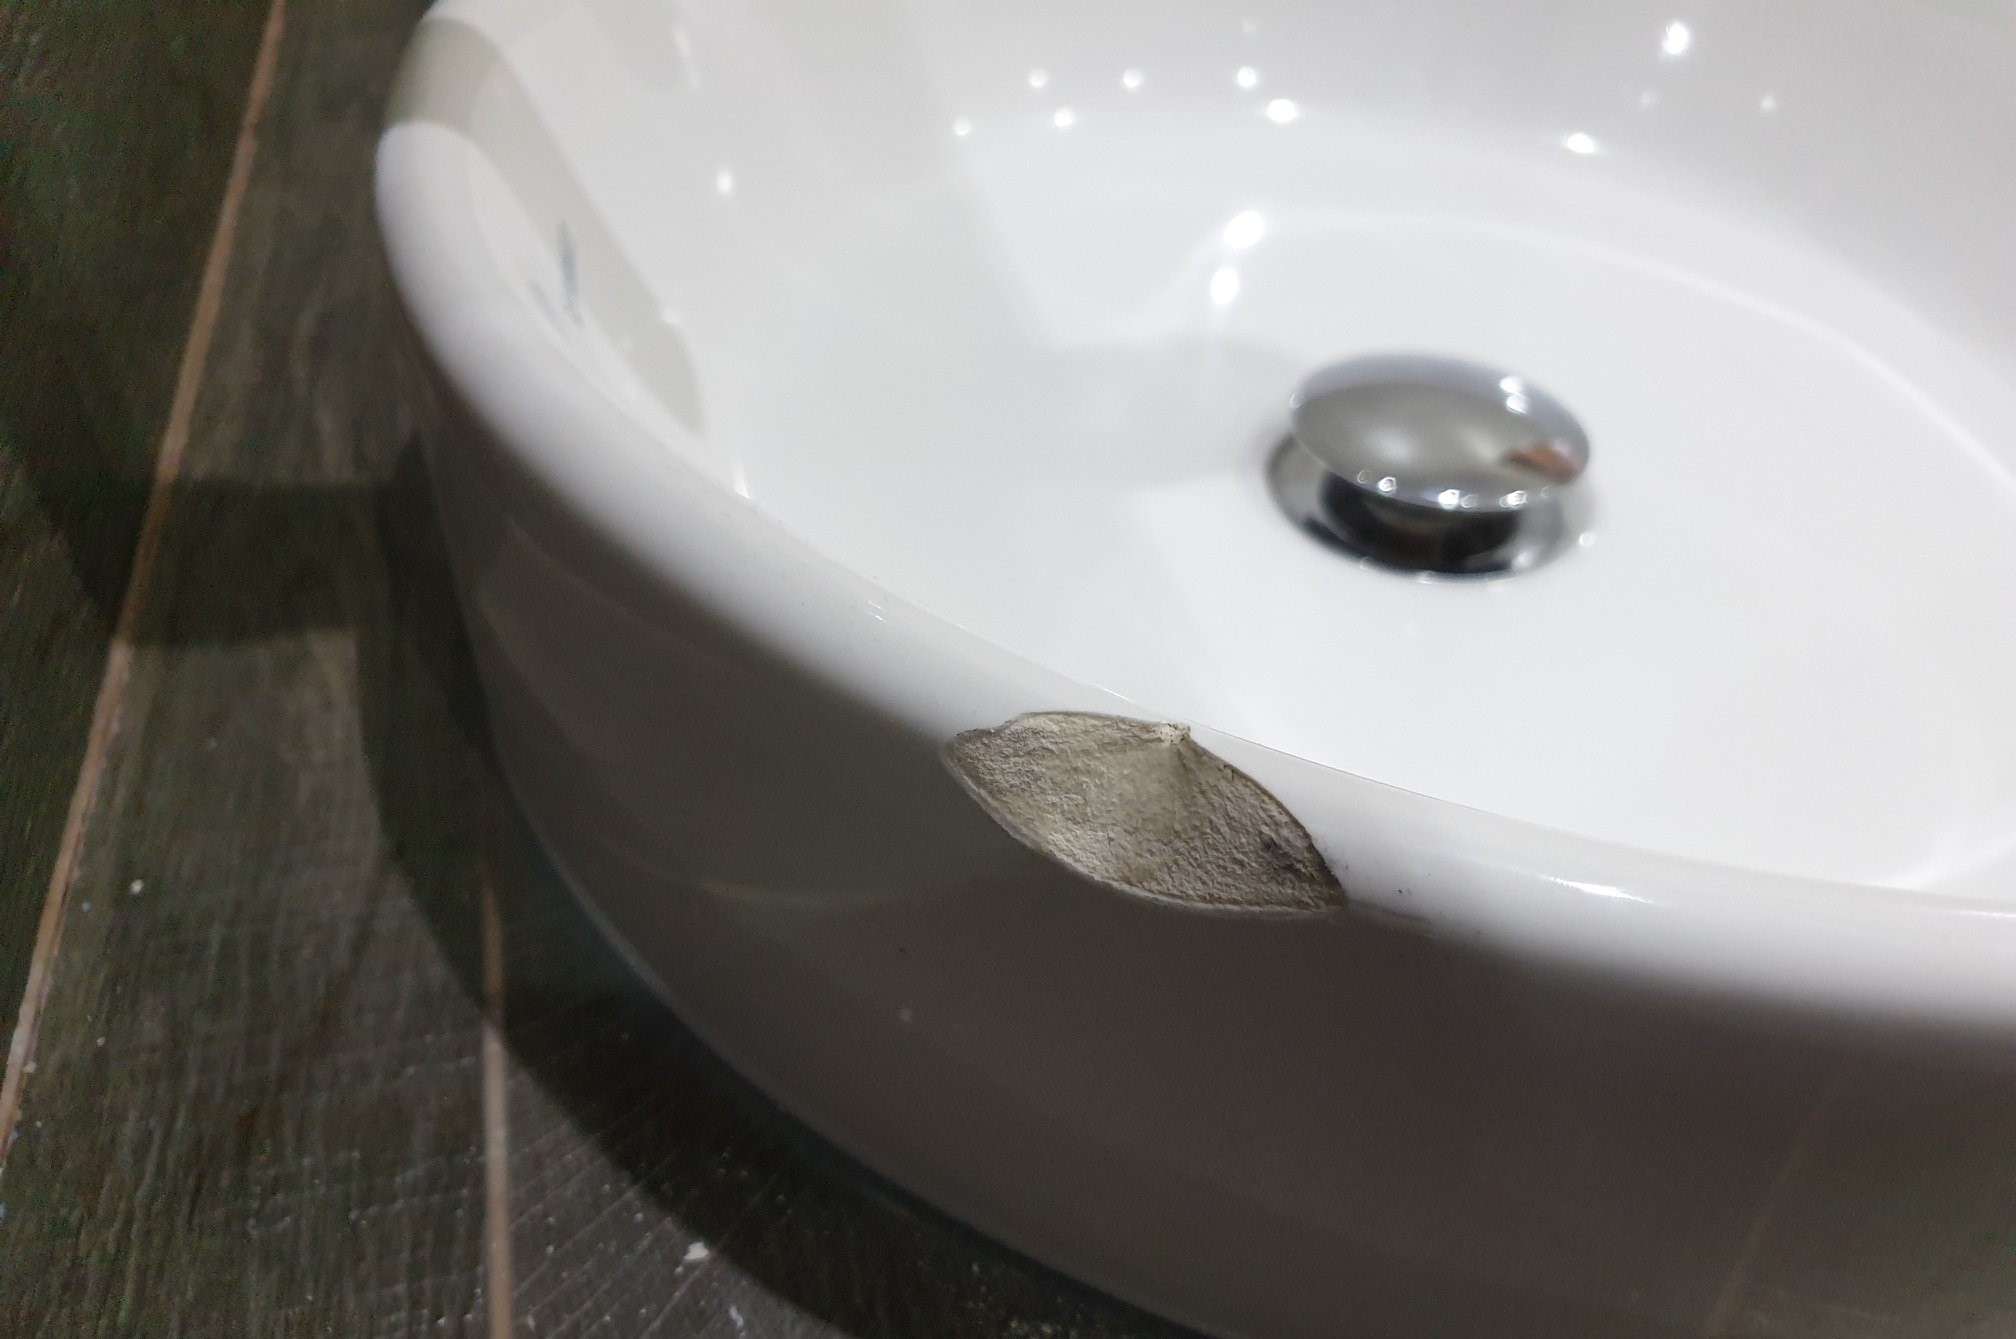 How To Repair A Chipped Porcelain Sink